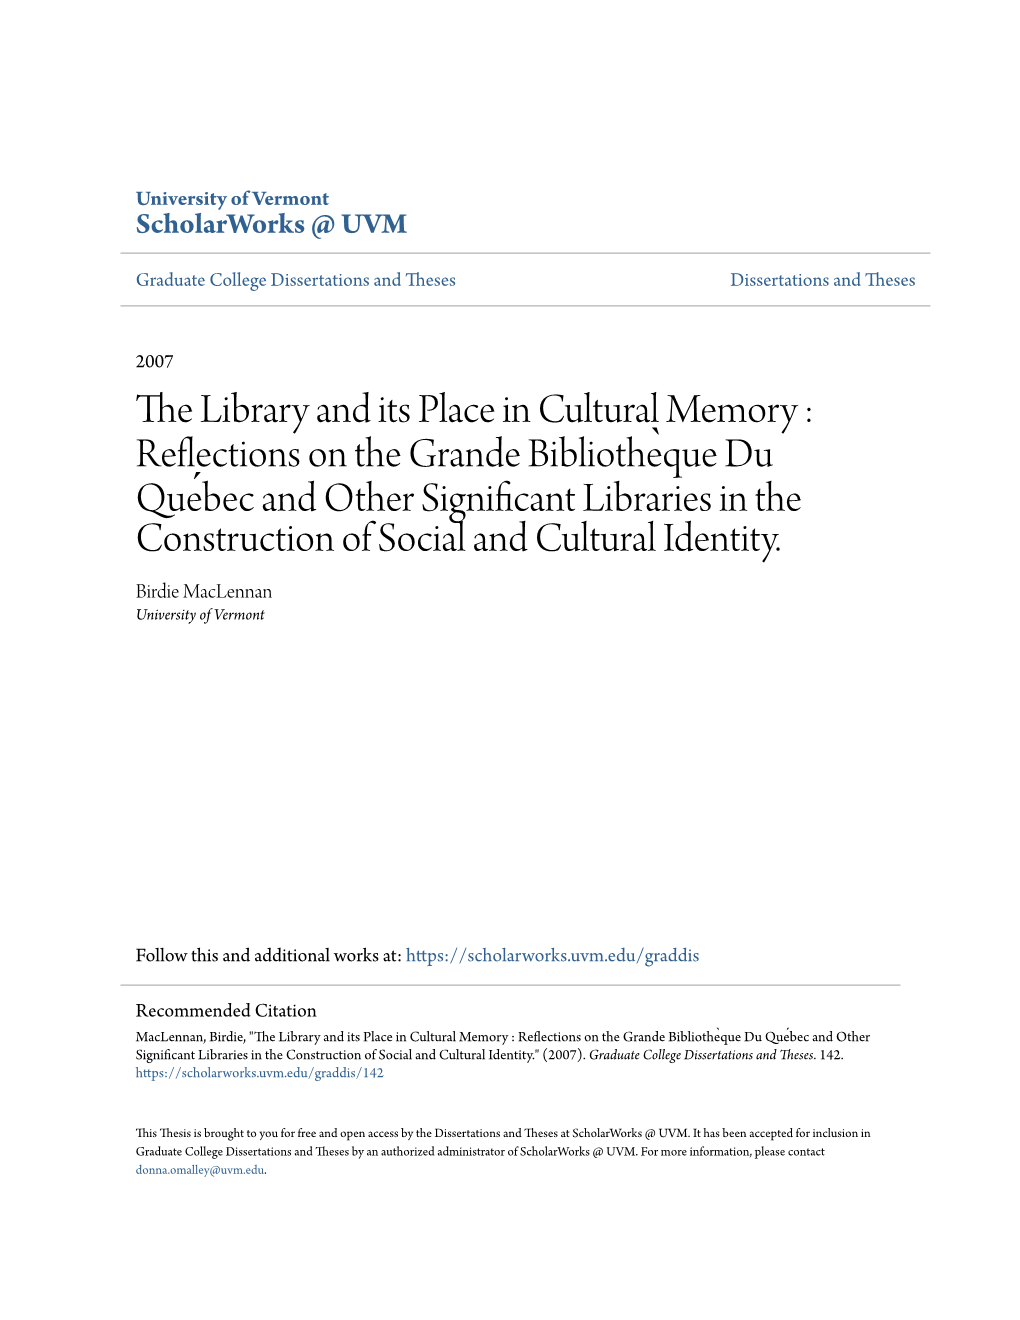 The Library and Its Place in Cultural Memory : Reflections on the Grande